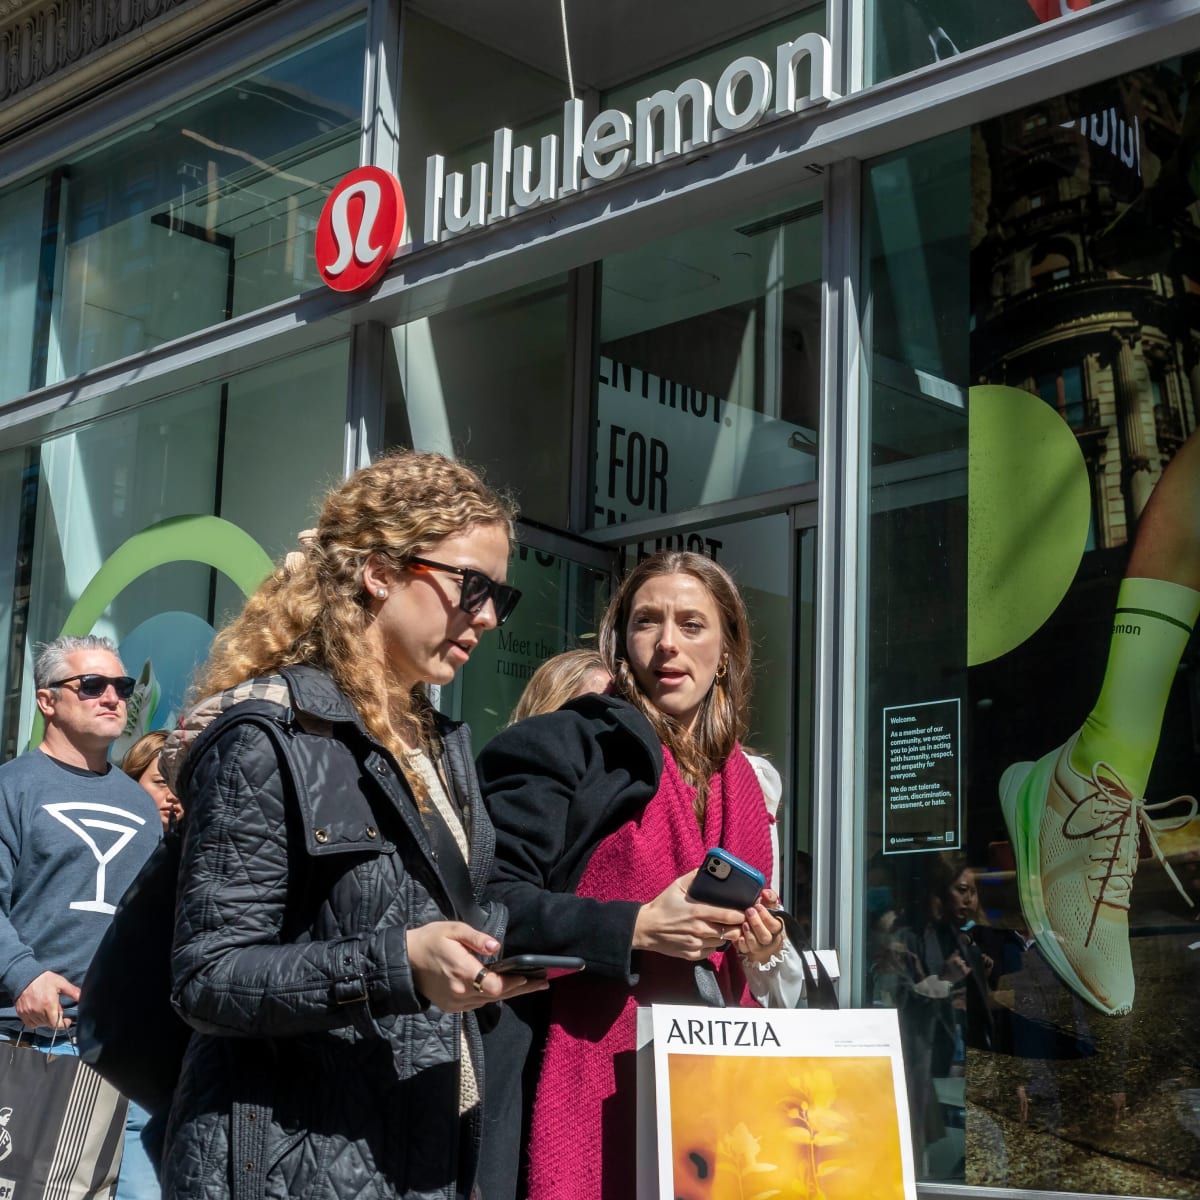 How to Get Free Lululemon Leggings (Act Fast) - TheStreet